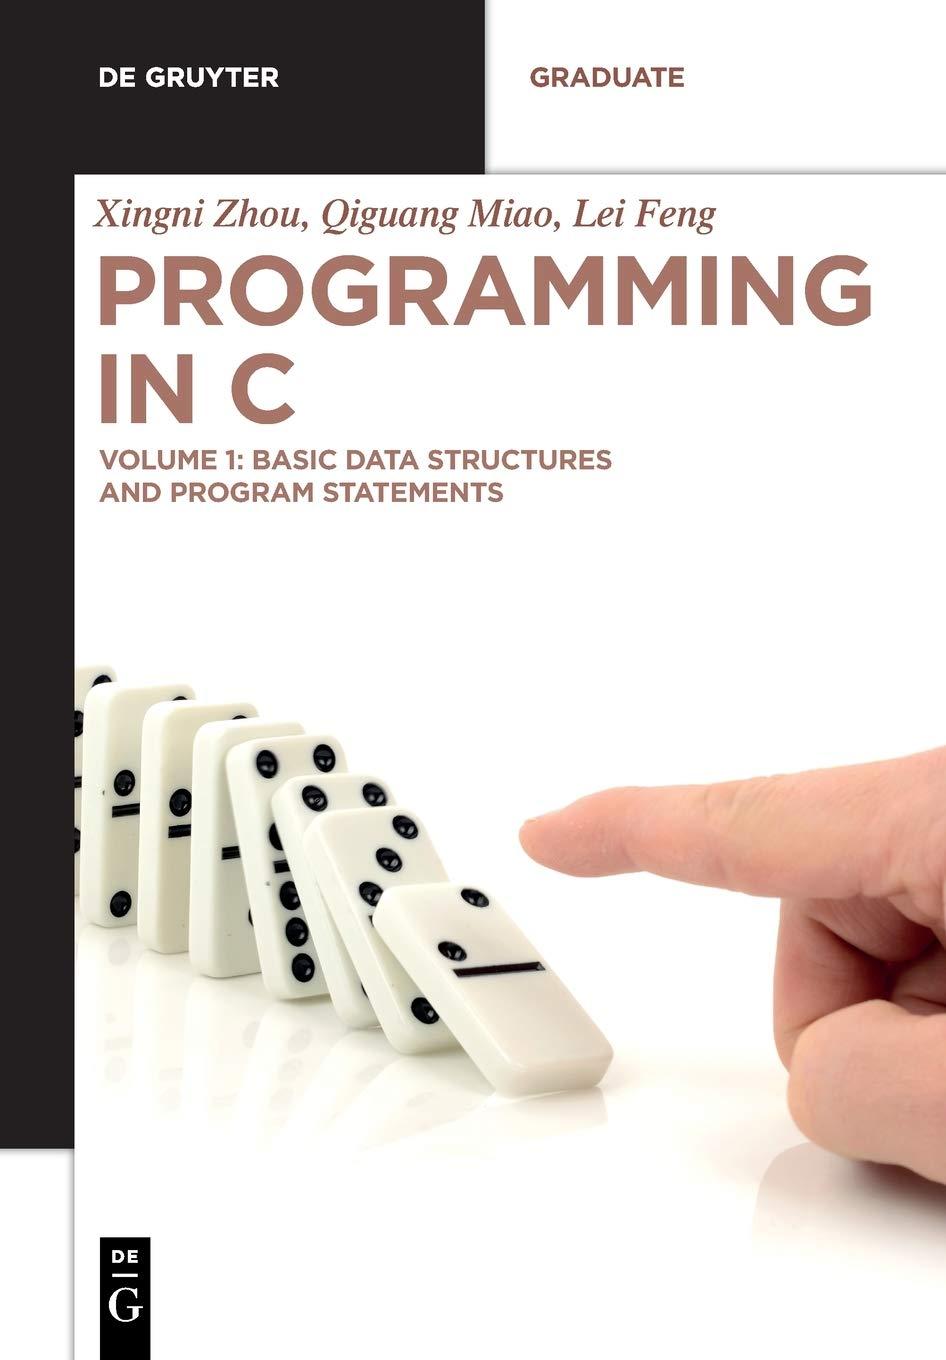 basic data structures and program statements de gruyter textbook 1st edition xingni zhou, qiguang miao, lei